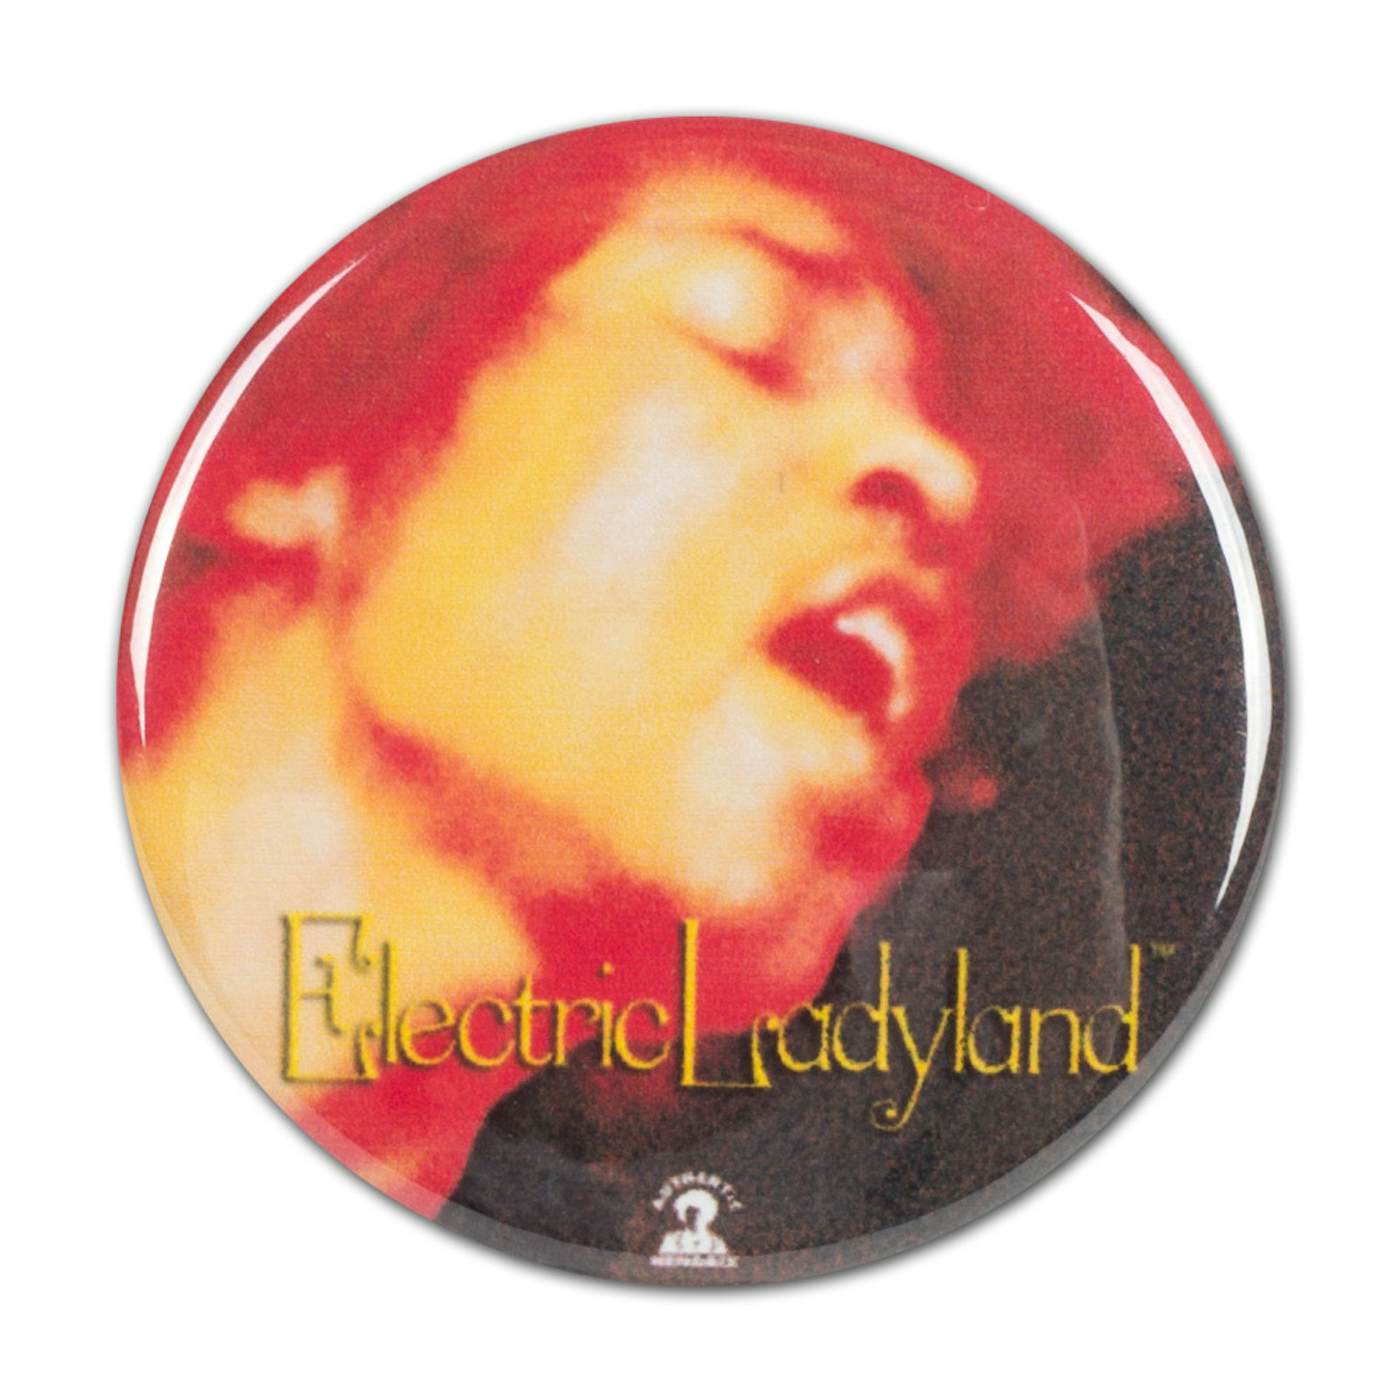 Jimi Hendrix: Electric Ladyland Button